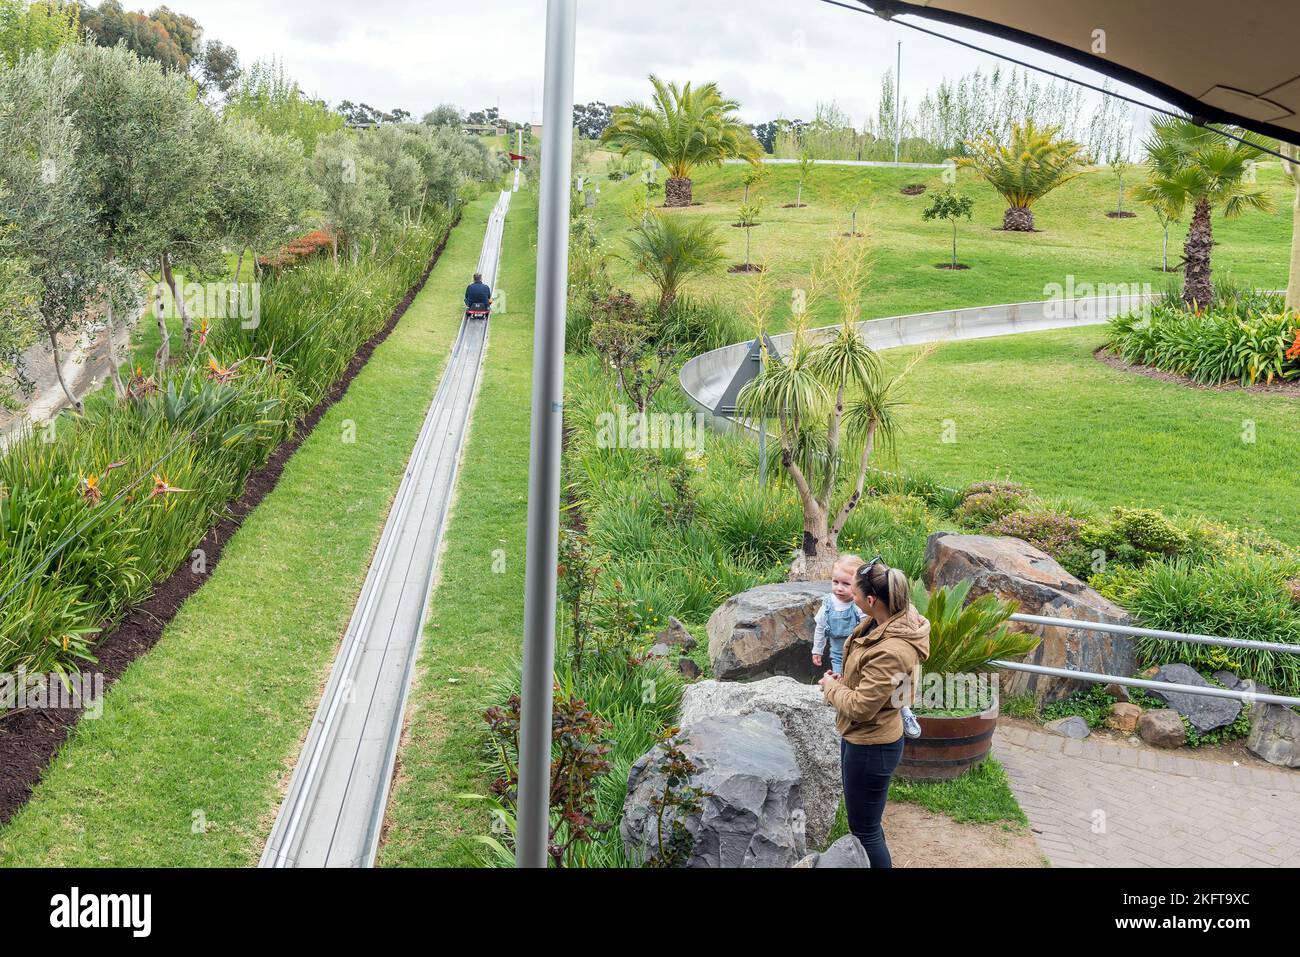 Bellville, South Africa - Sep 17, 2022: Tobogganing at Cool Runnings in Bellville in the Western Cape Province. People are visible Stock Photo